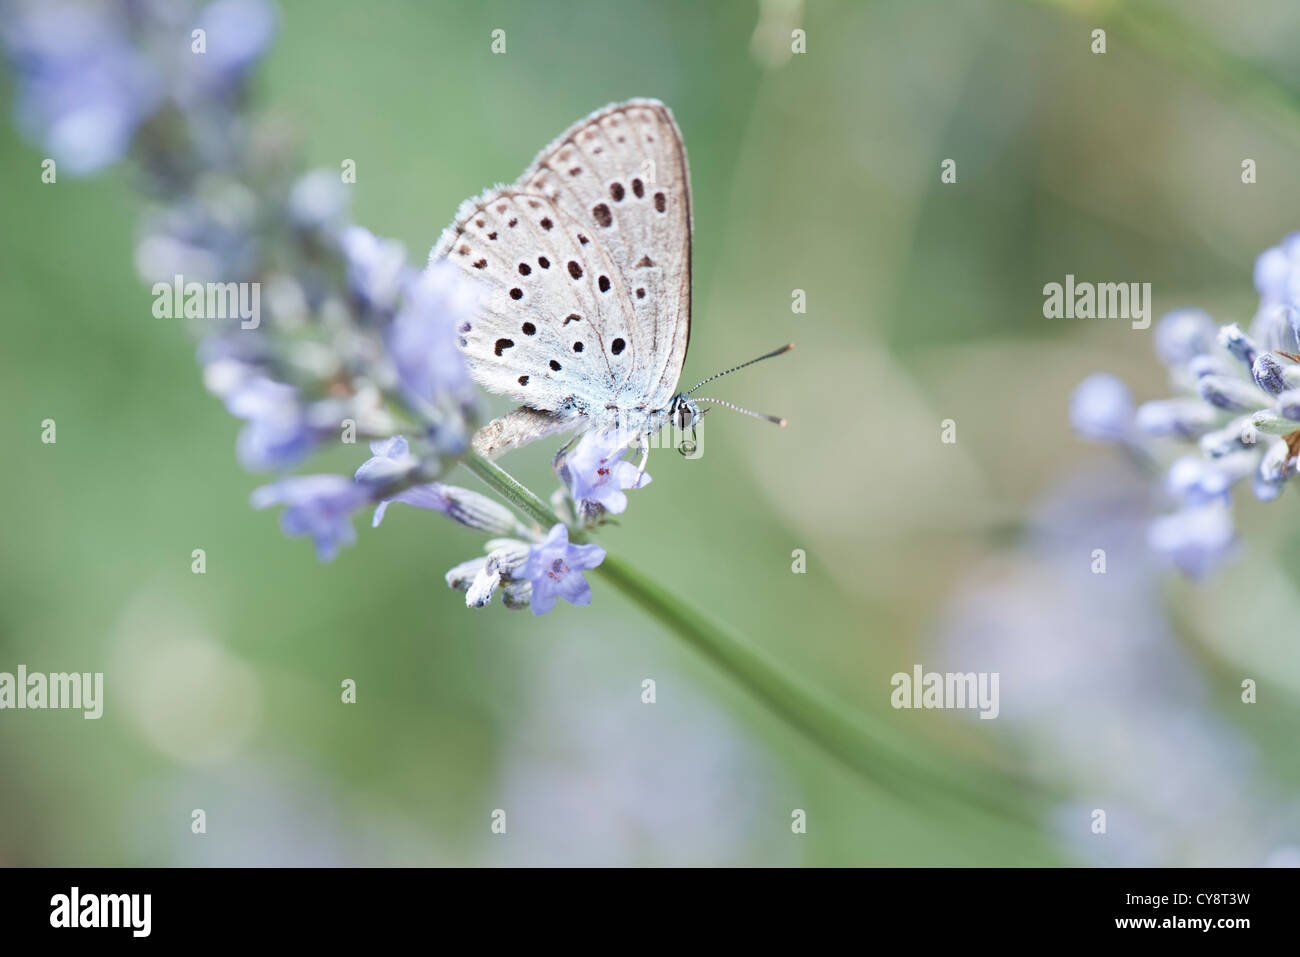 Lycaenidae butterfly on lavender flowers Stock Photo